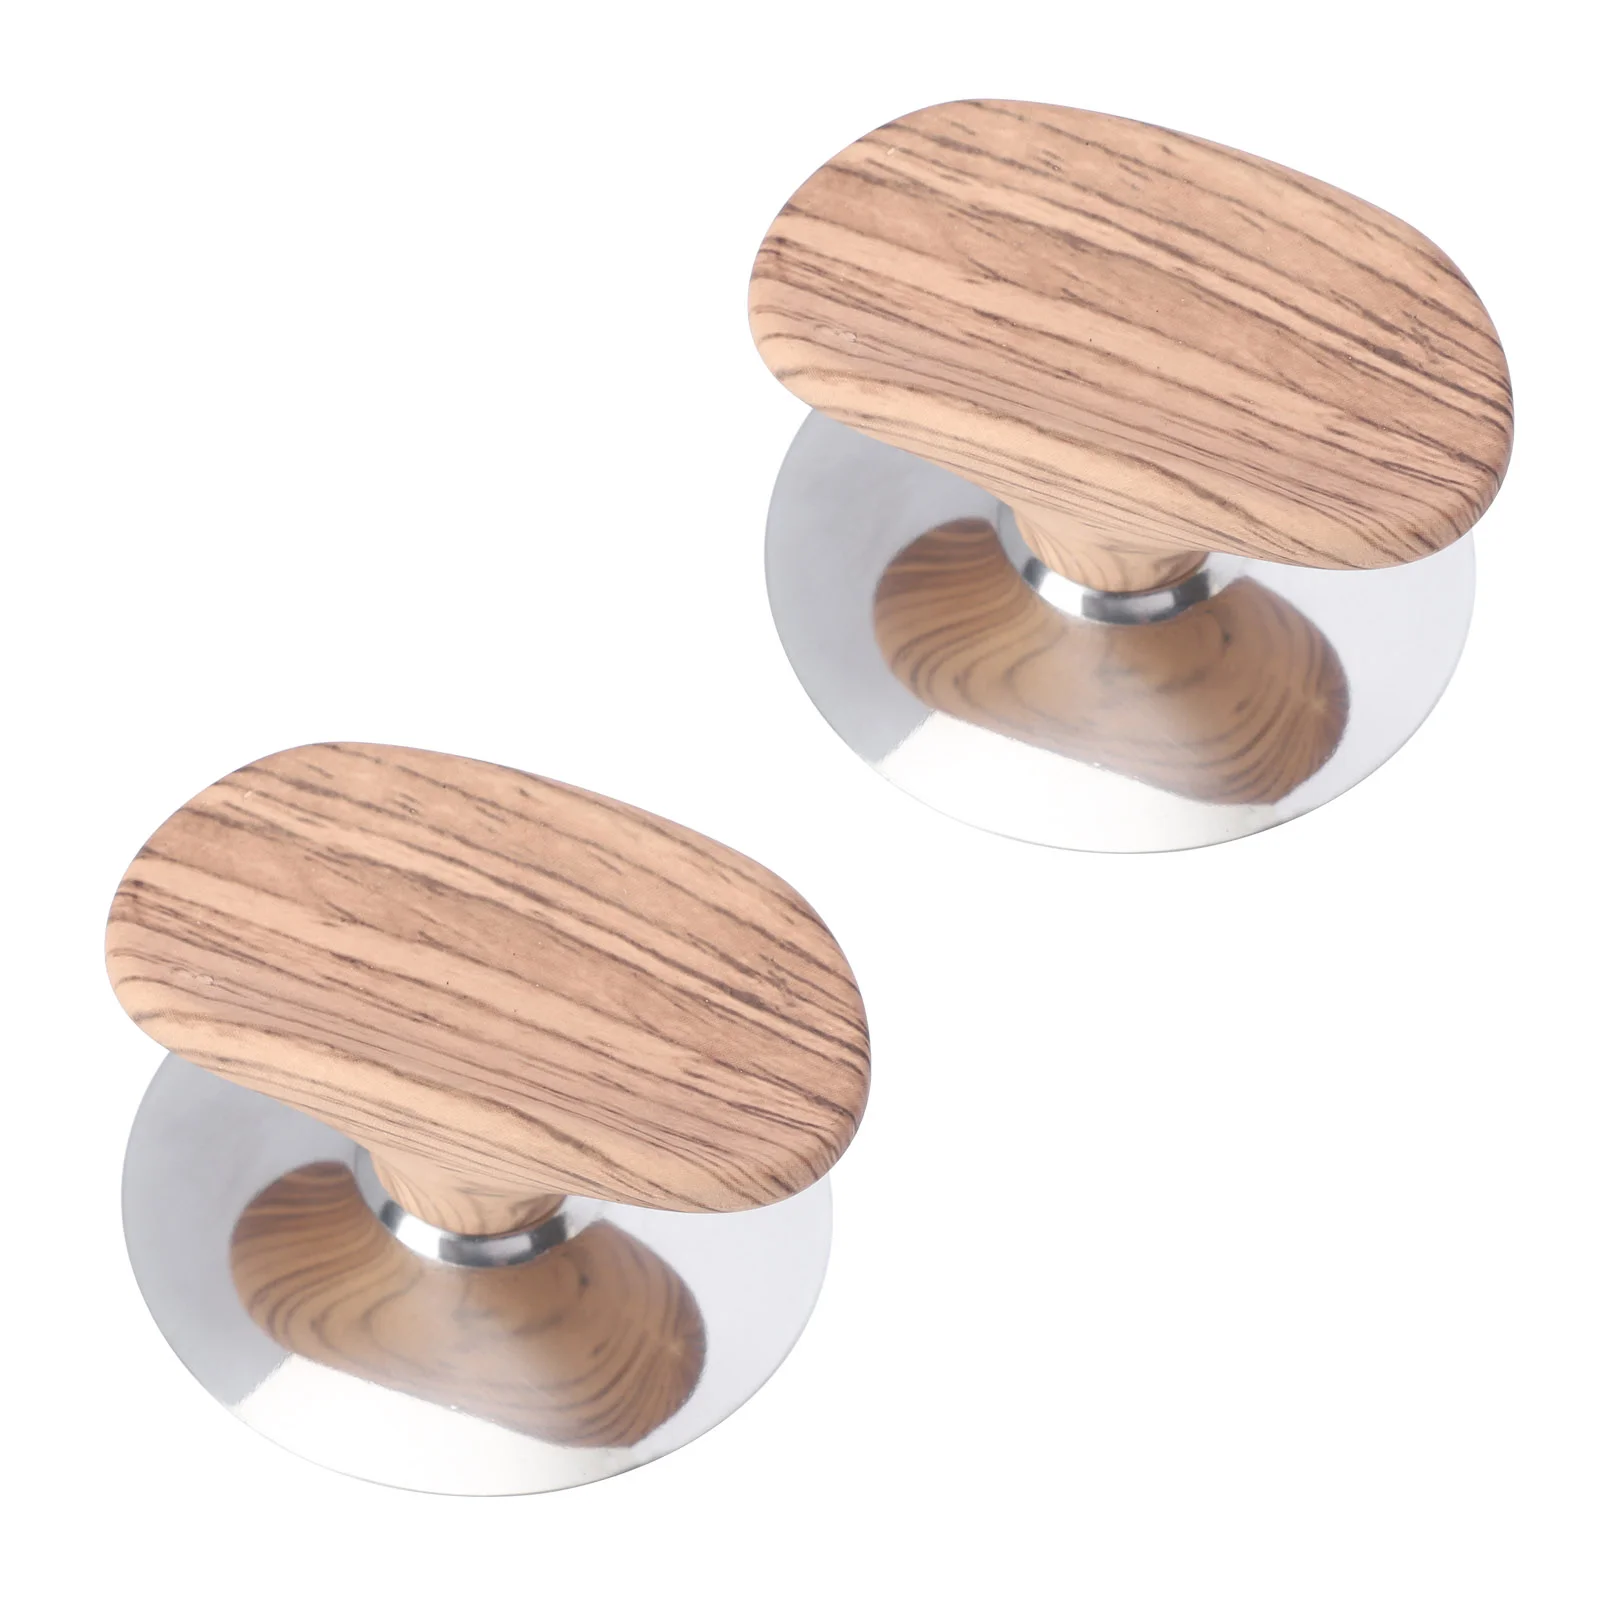 

2 Pcs Wood Grain Pot Lid Handle Anti-scald Cookware Knob Cover Cooking Stainless Steel Saucepan Replacement Universal